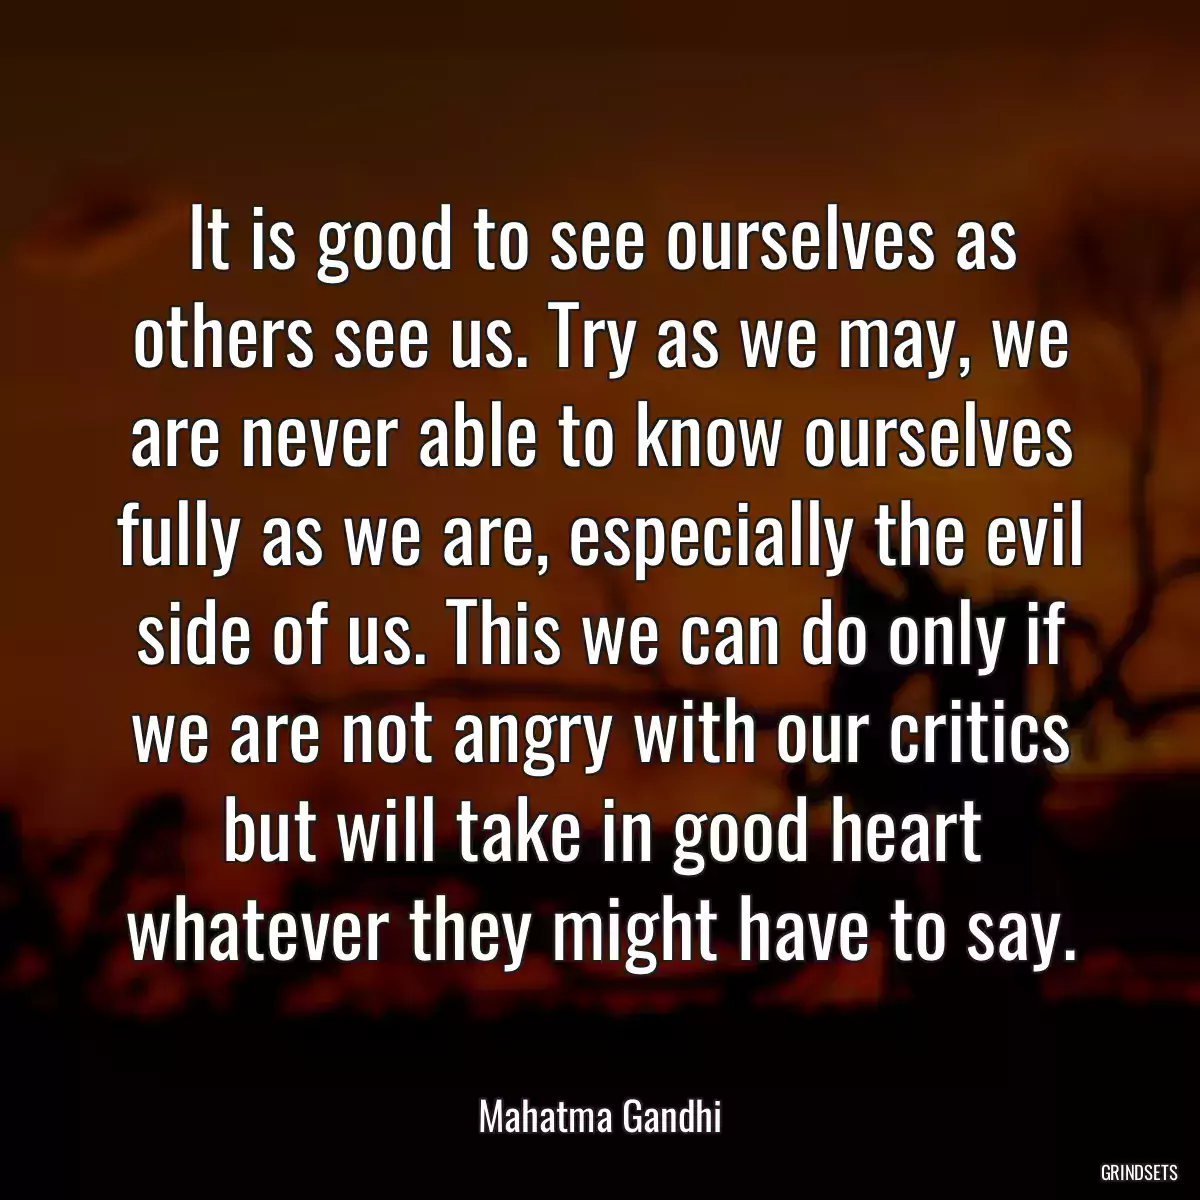 It is good to see ourselves as others see us. Try as we may, we are never able to know ourselves fully as we are, especially the evil side of us. This we can do only if we are not angry with our critics but will take in good heart whatever they might have to say.